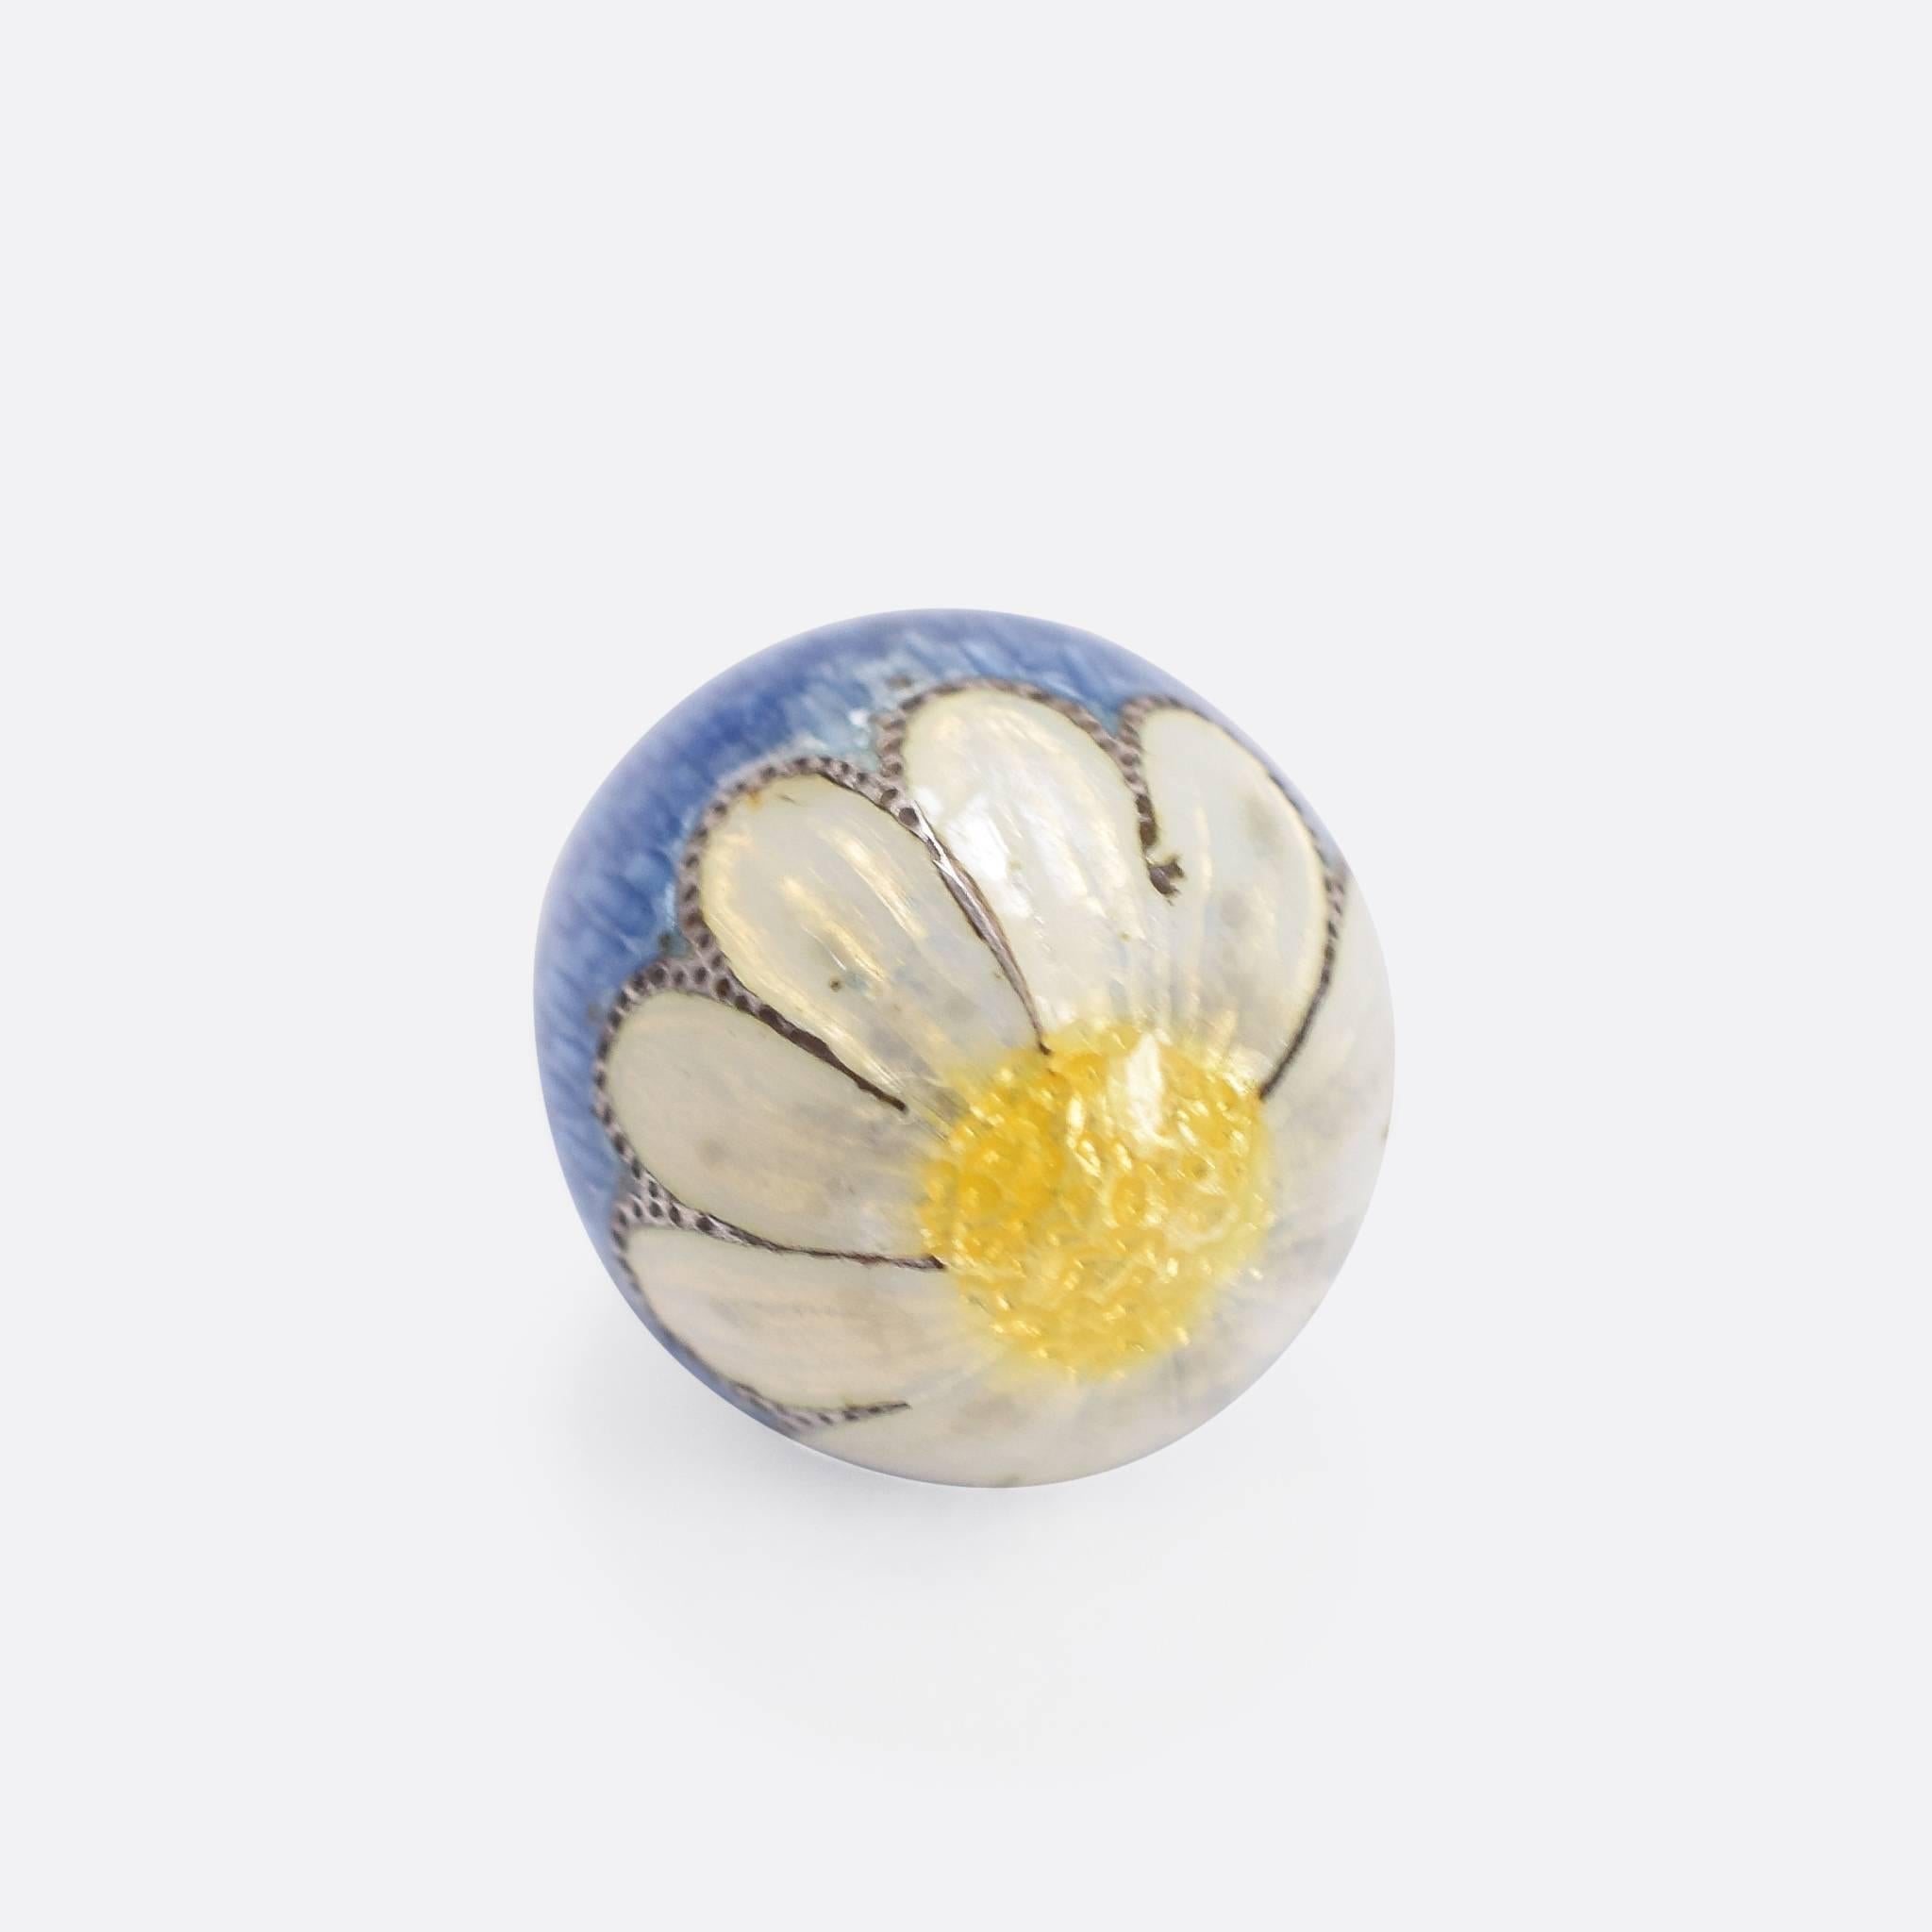 This stunning antique Russian miniature egg pendant is finished in beautiful powder-blue enamel, with a white and yellow daisy spread over the bottom. A fine example of the immensely collectable style, and wonderful with the daisy detail.